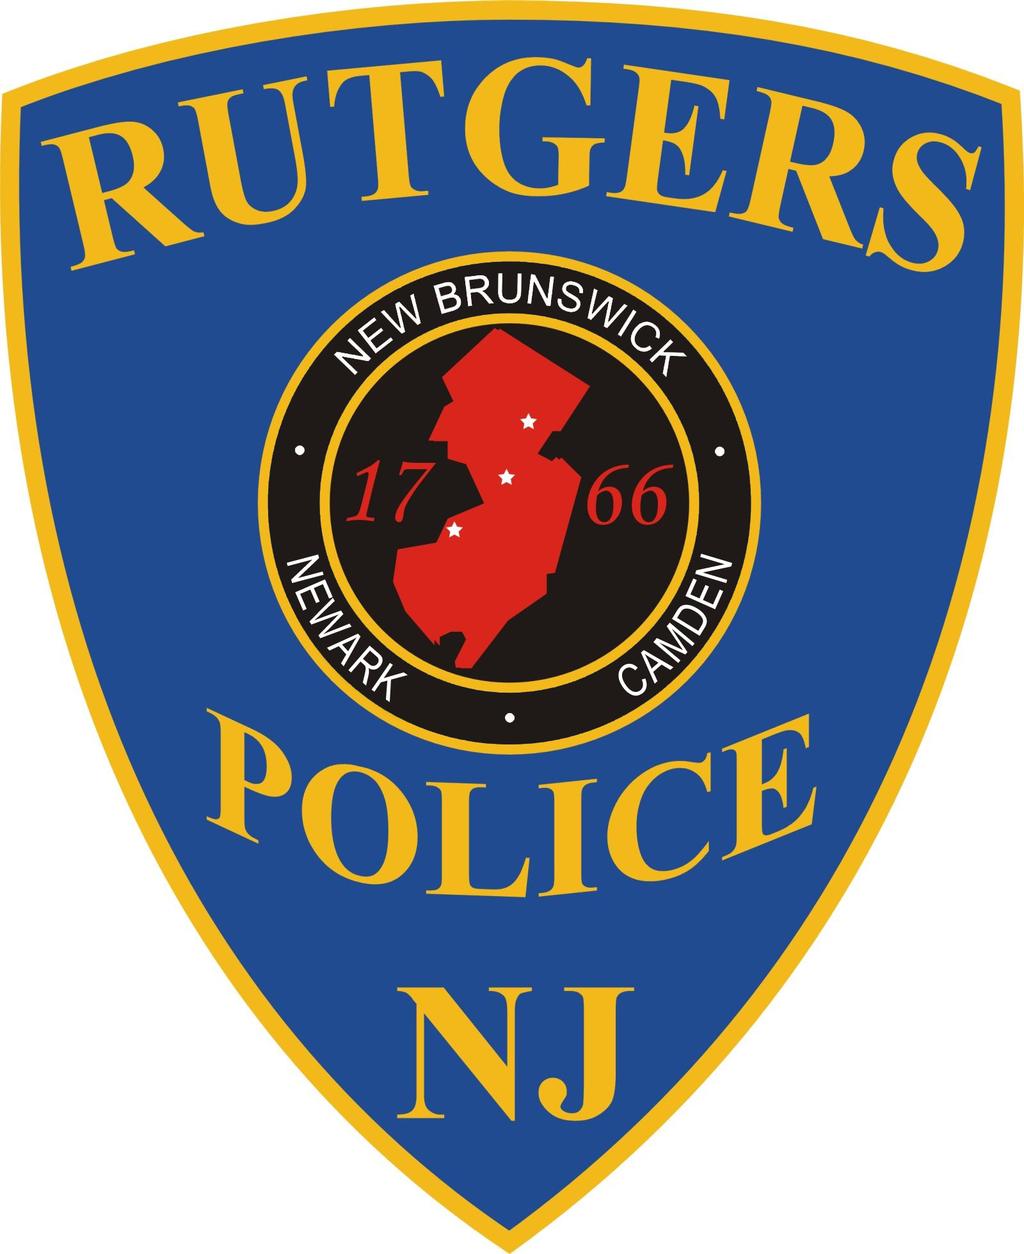 Daily Crime and Fire Safety Log Rutgers PD New Thursday 01 November 2018 Wednesday 21 November 2018 Incident GIBBONS 181001906 Intoxicated Person 11/01/18 0002Hrs 10/31/18 2344Hrs RESIDENCE HALL H